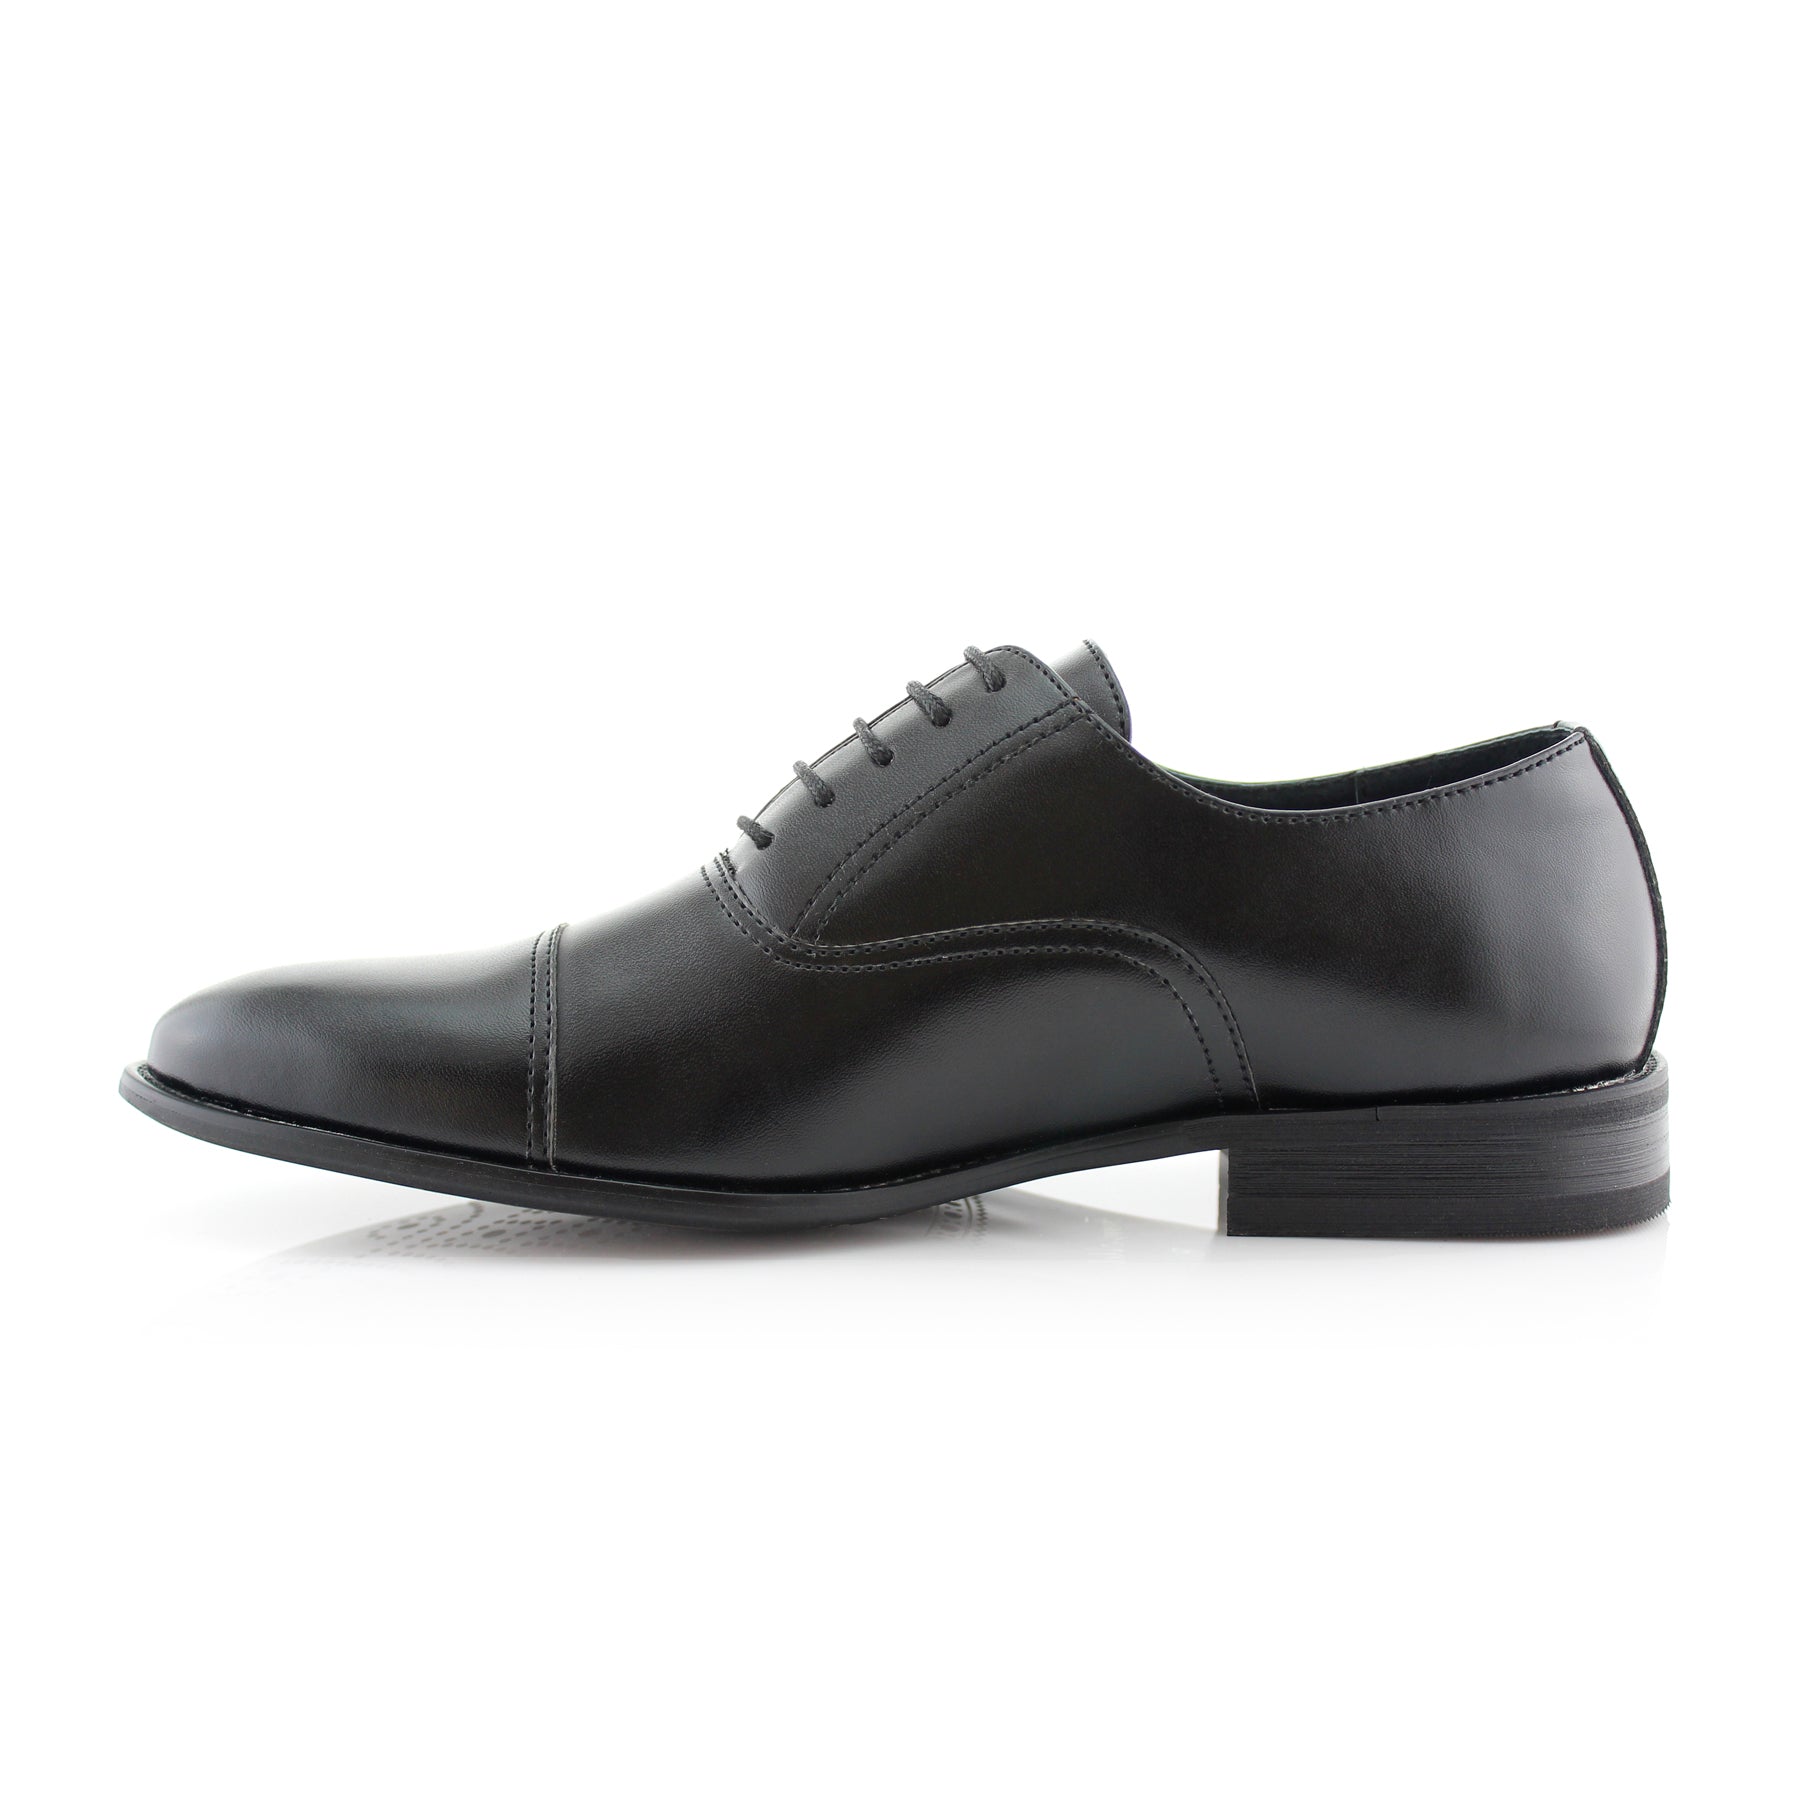 Classic Cap-Toe Oxford Dress Shoes | Charles by Ferro Aldo | Conal Footwear | Inner Side Angle View